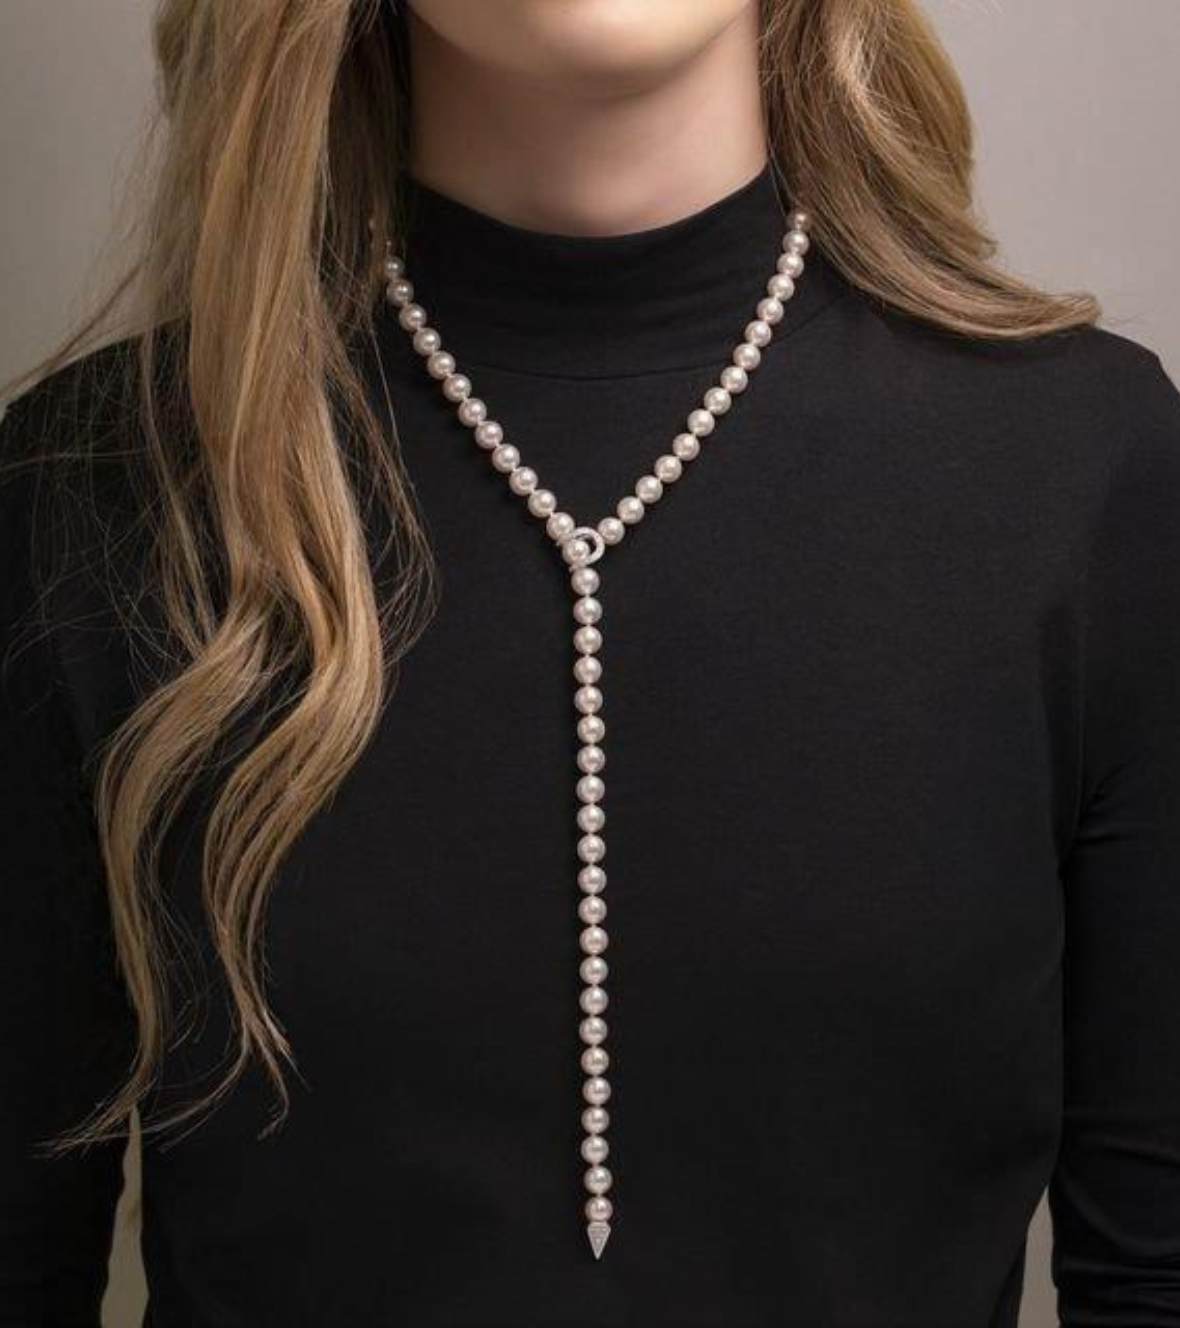 White Gold Pearl Necklace with Diamonds by Mentis Collection